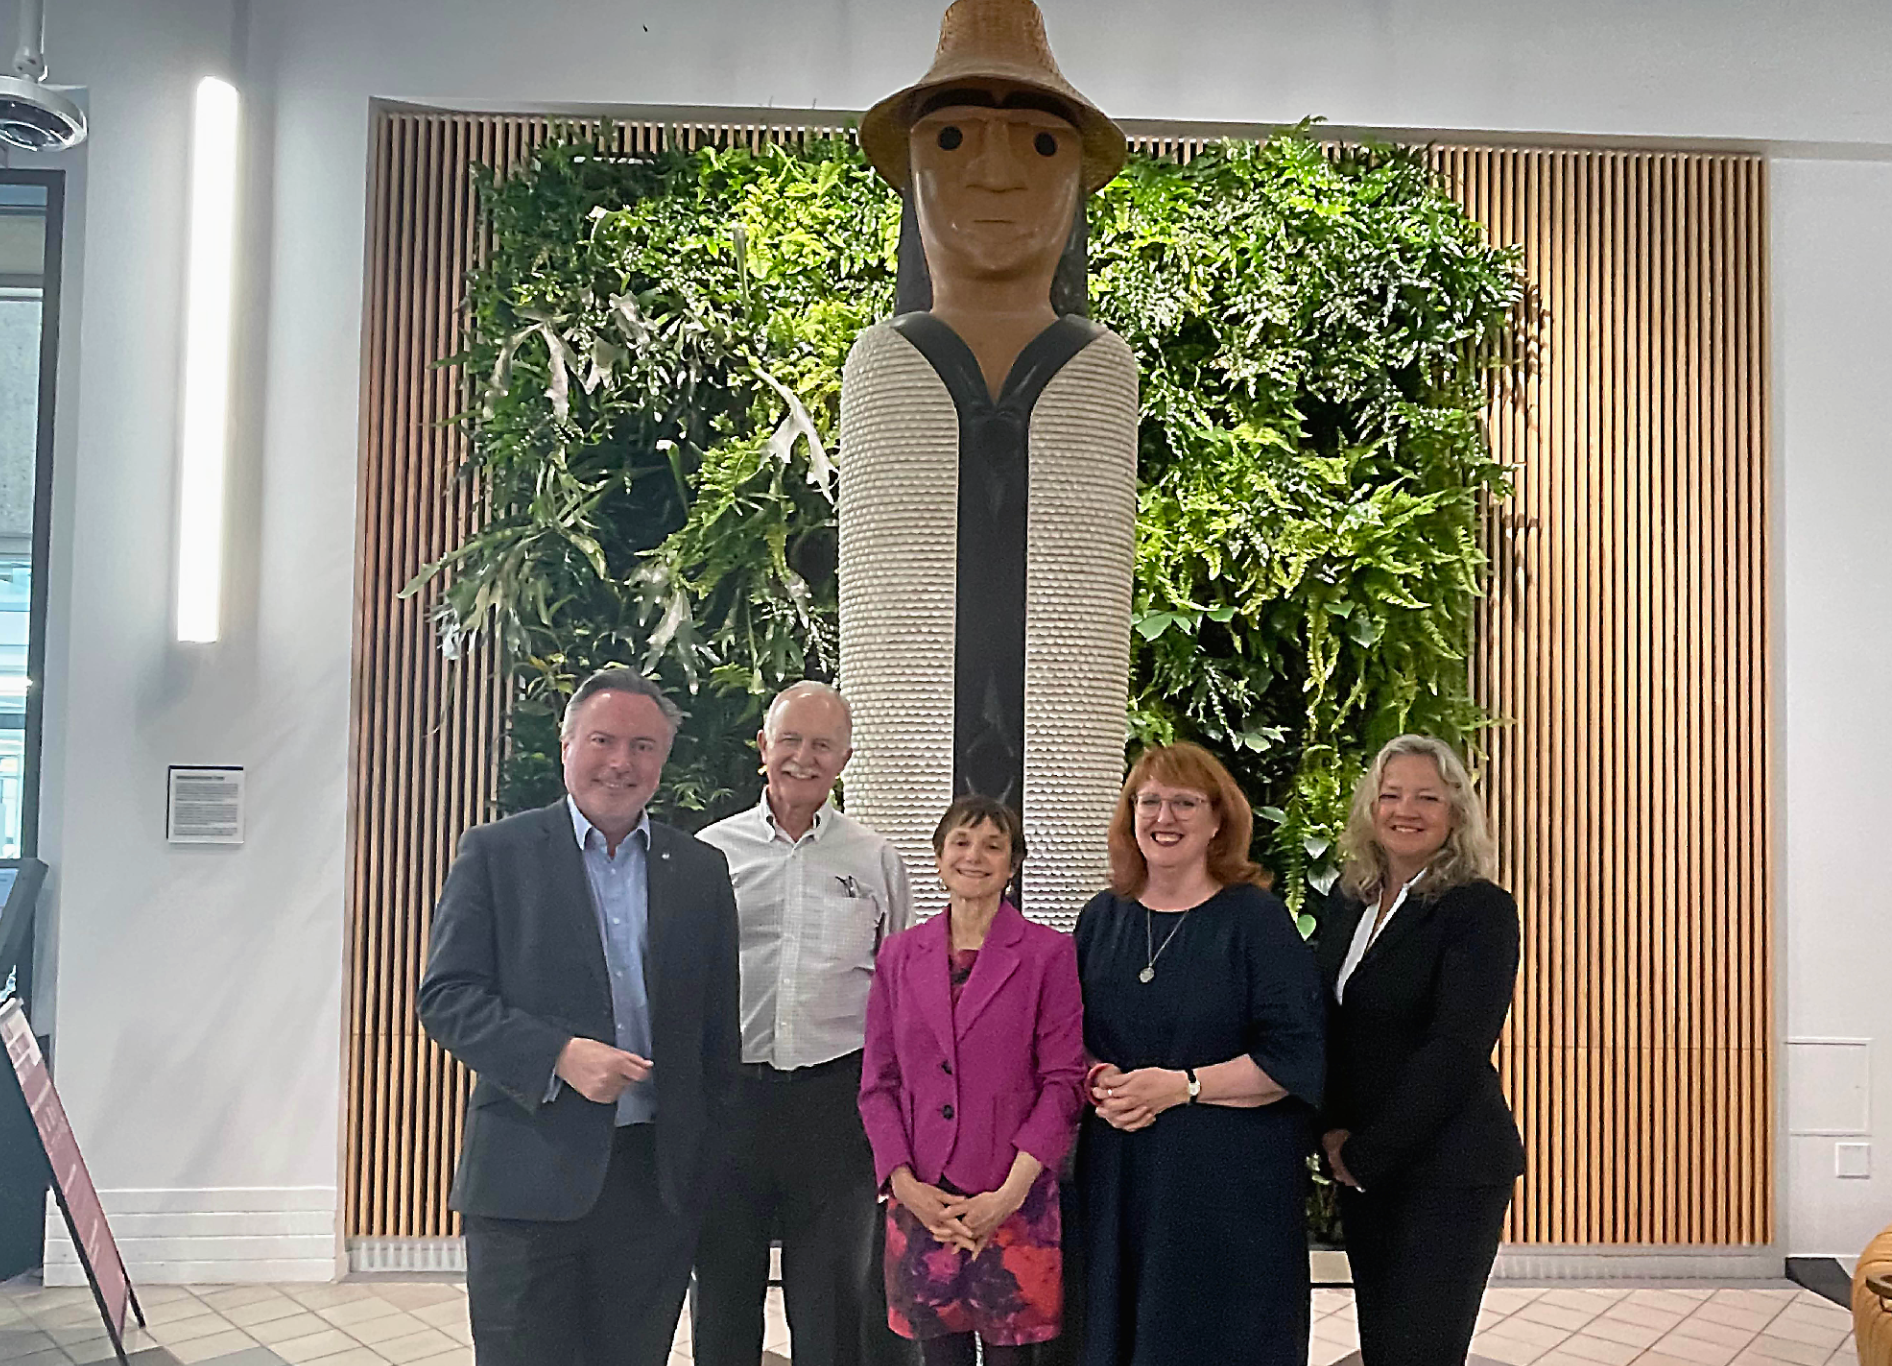 Alyn Smith, Laurie Anderson, Leith Davis, Deidre Brock, and Laurel Weldon in front of an Indigenous carving at SFU Harbour Centre